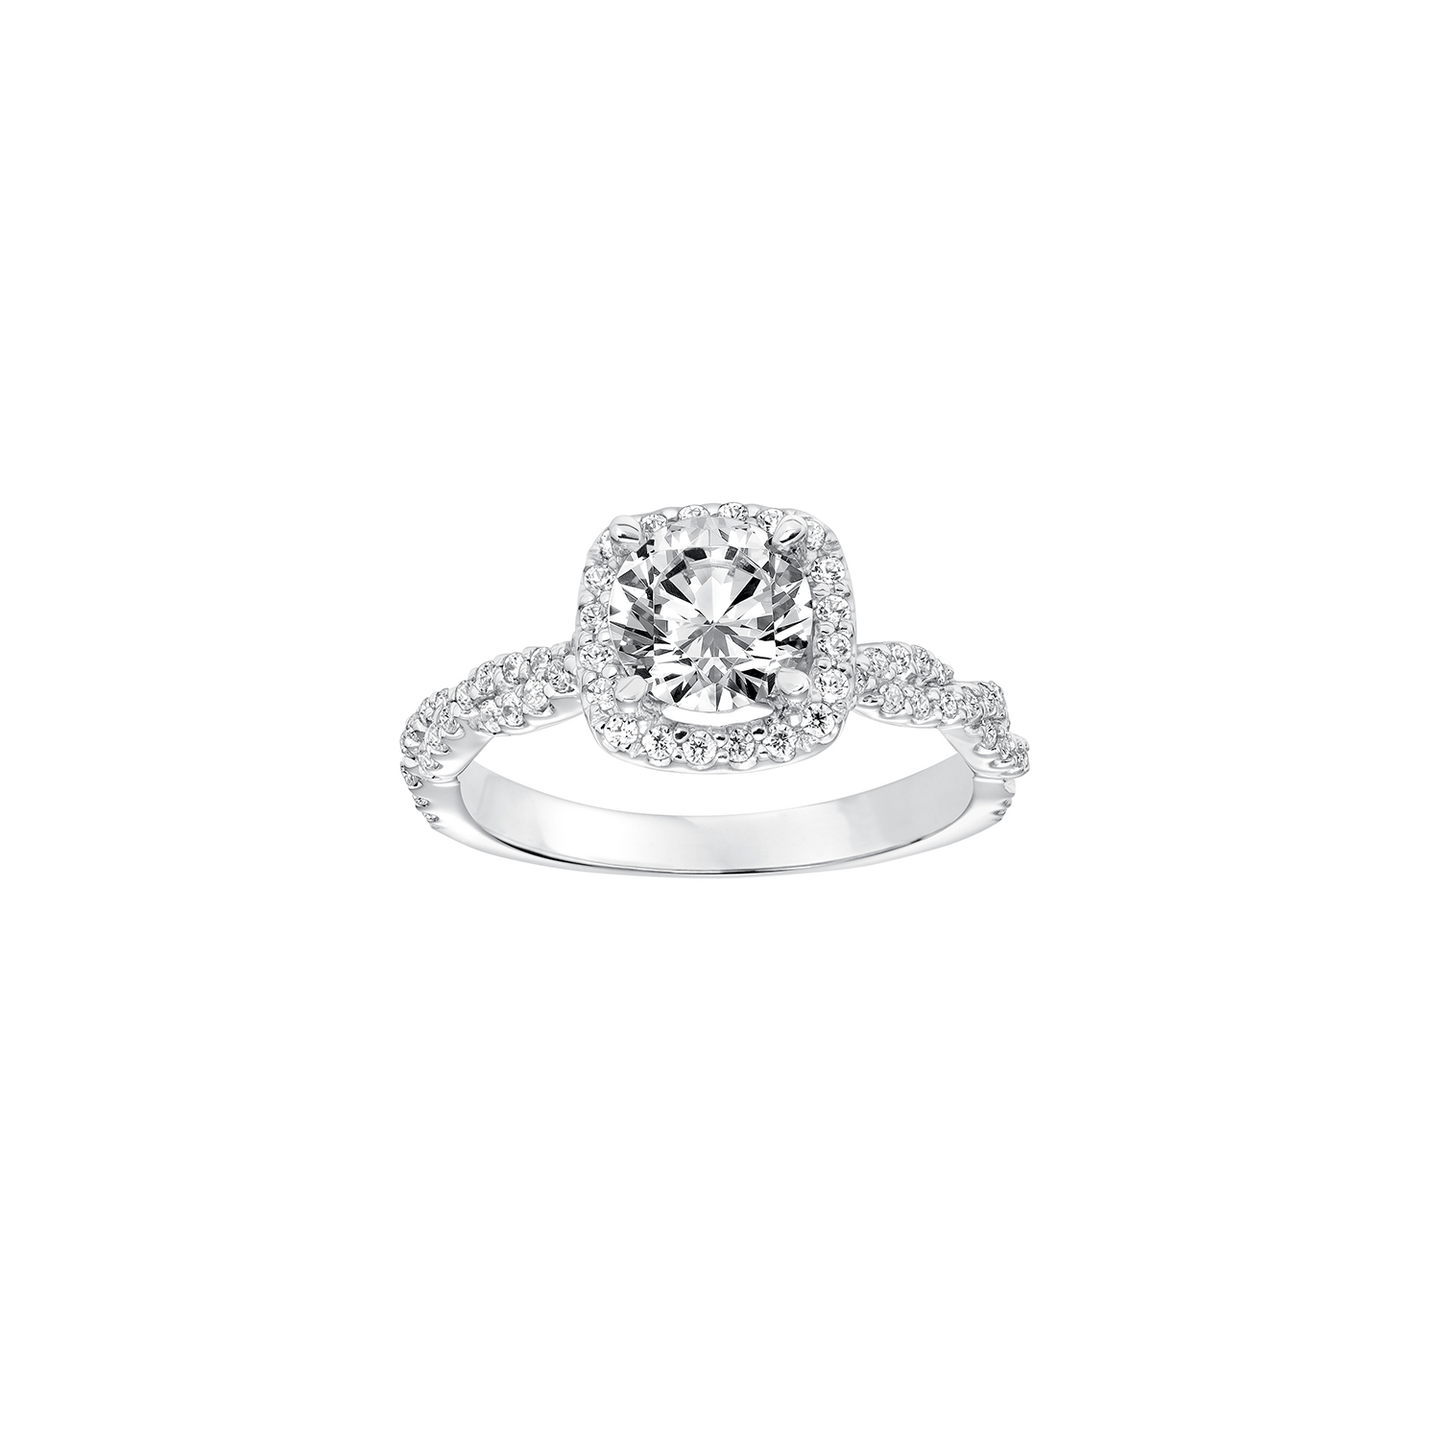 Fink's Exclusive 14K White Gold Round Diamond Halo and Diamond Engagement Ring in .52ct